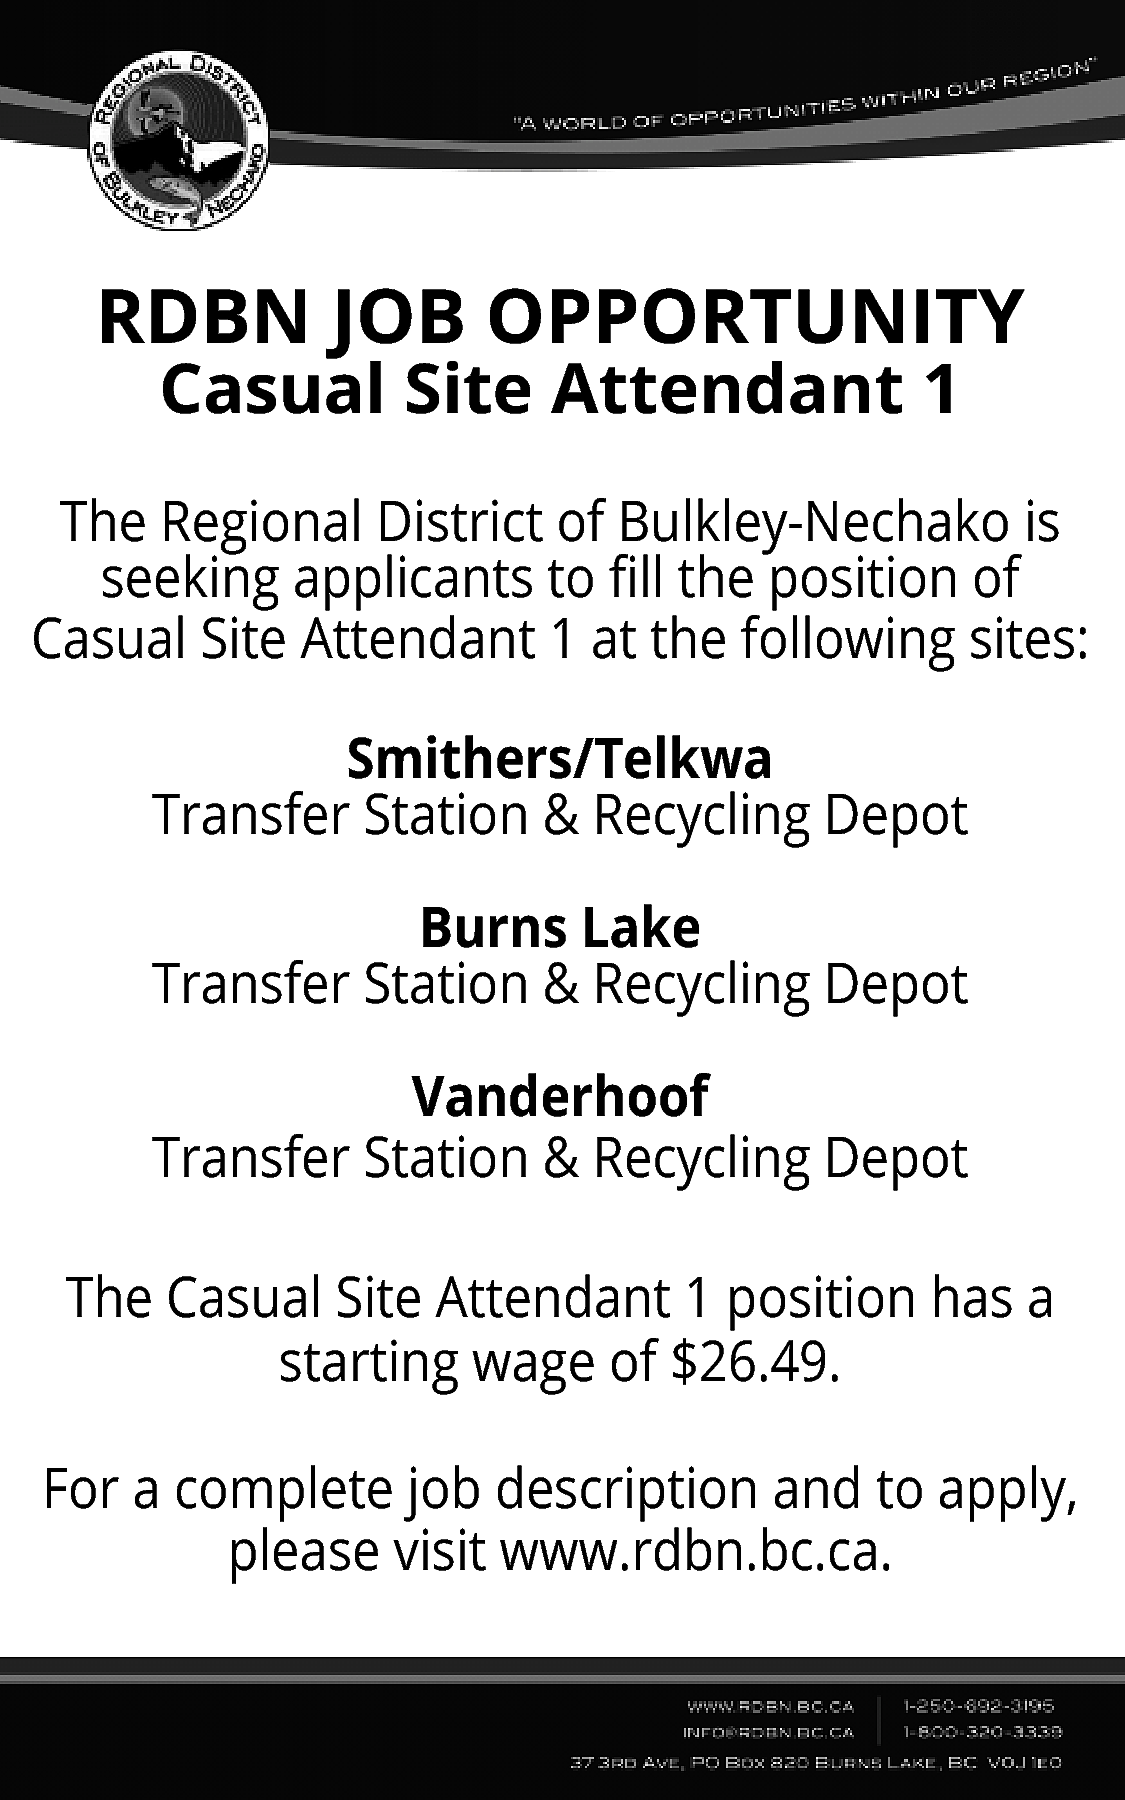 RDBN JOB OPPORTUNITY <br>Casual Site  RDBN JOB OPPORTUNITY  Casual Site Attendant 1    The Regional District of Bulkley-Nechako is  seeking applicants to fill the position of  Casual Site Attendant 1 at the following sites:  Smithers/Telkwa  Transfer Station & Recycling Depot  Burns Lake  Transfer Station & Recycling Depot  Vanderhoof  Transfer Station & Recycling Depot  The Casual Site Attendant 1 position has a  starting wage of $26.49.  For a complete job description and to apply,  please visit www.rdbn.bc.ca.    